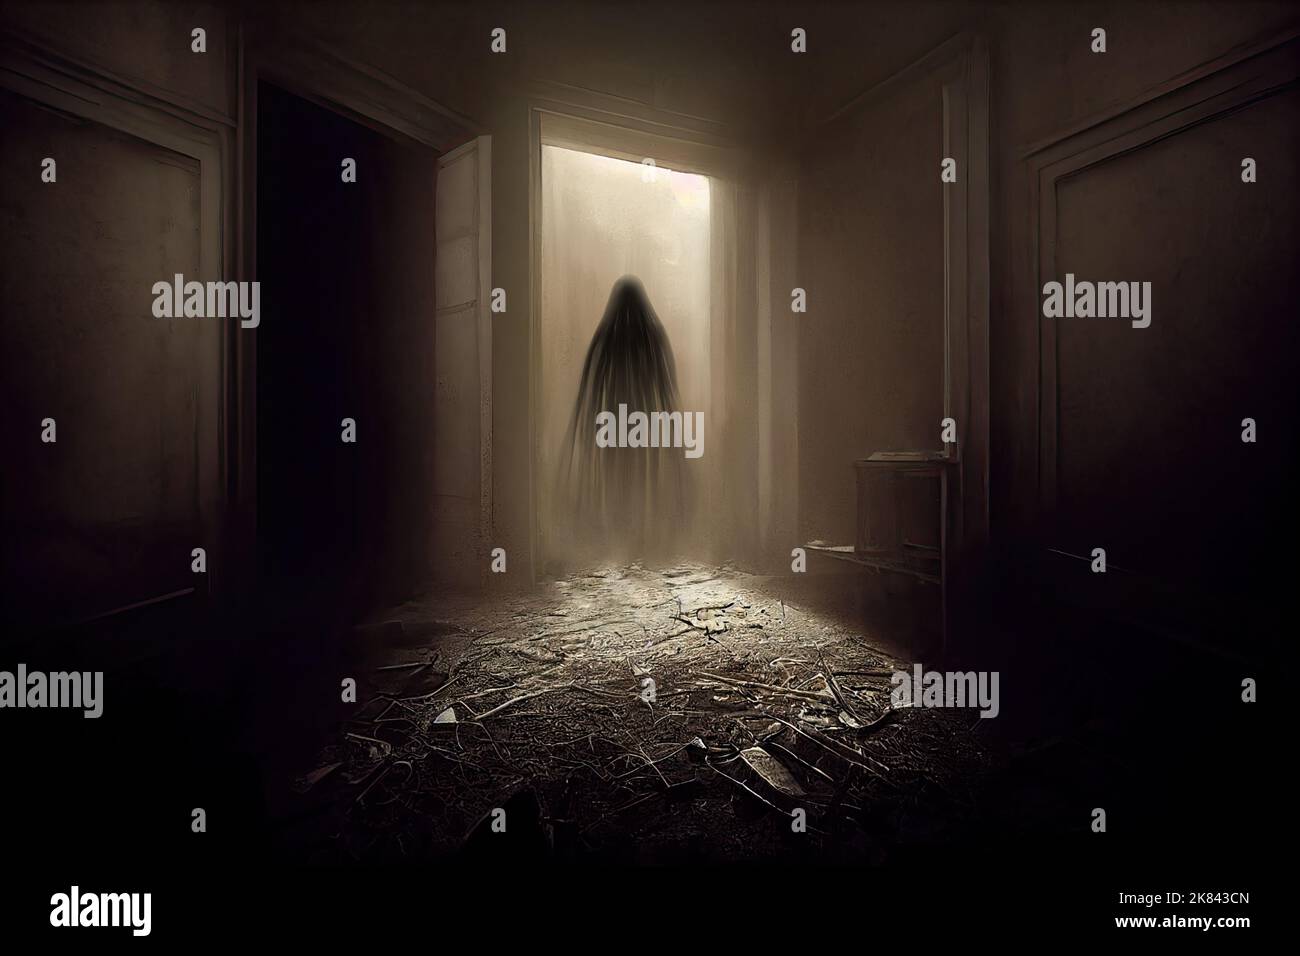  A ghostly figure with a dark veil over its face stands in front of a doorway in a dark room.